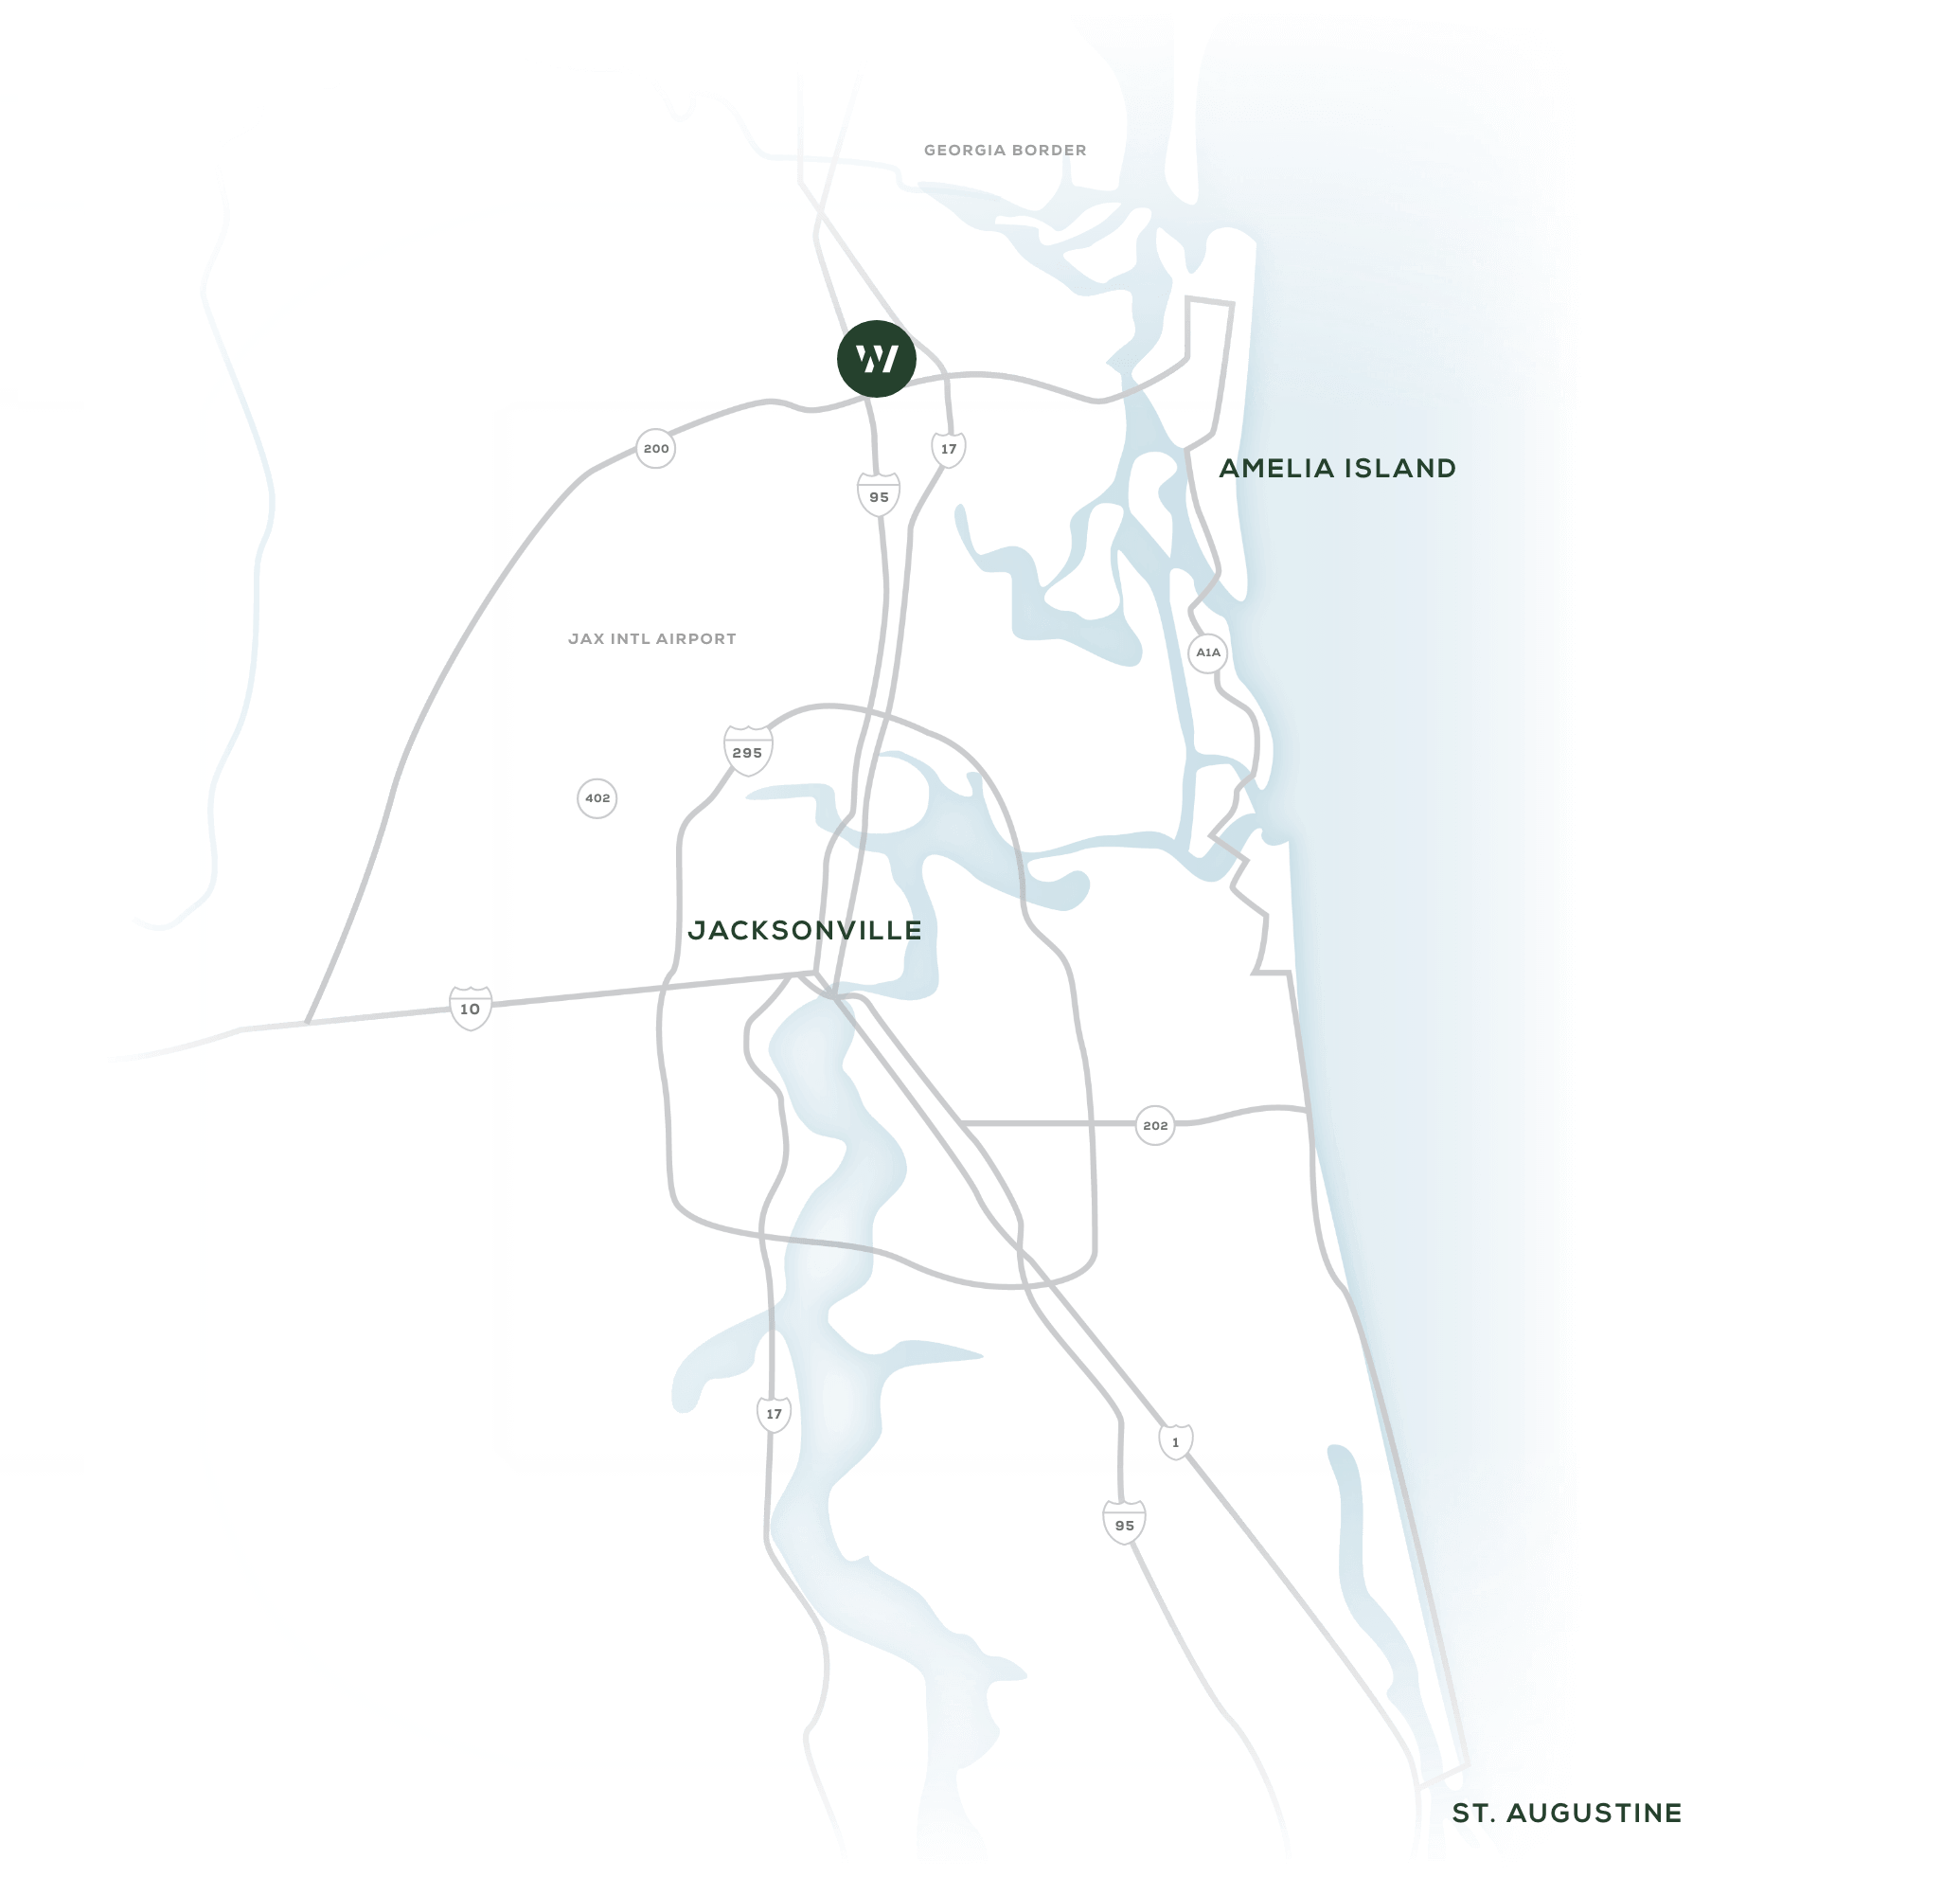 Illustrative map of northeast Florida with a focus on Wildlight which is located between Jacksonville and Amelia Island. 